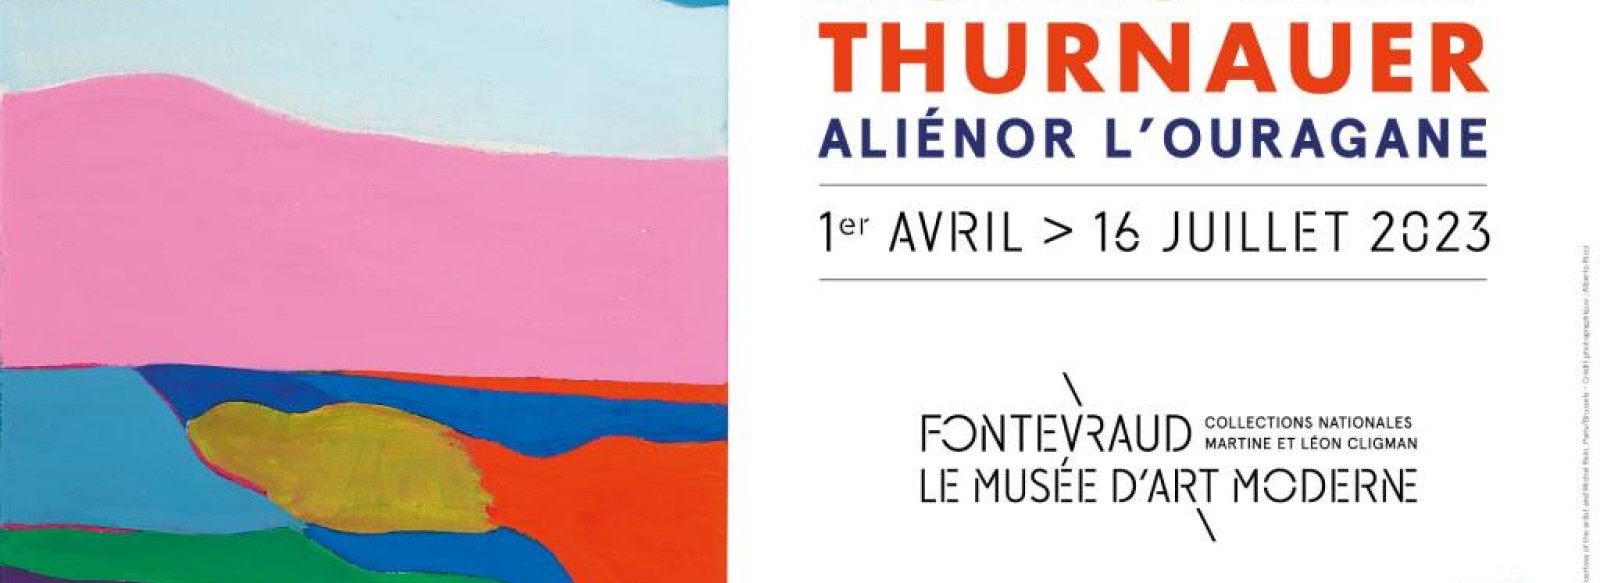 EXPOSITION D'AGNES THURNAUER : "ALIENOR L'OURAGANE"